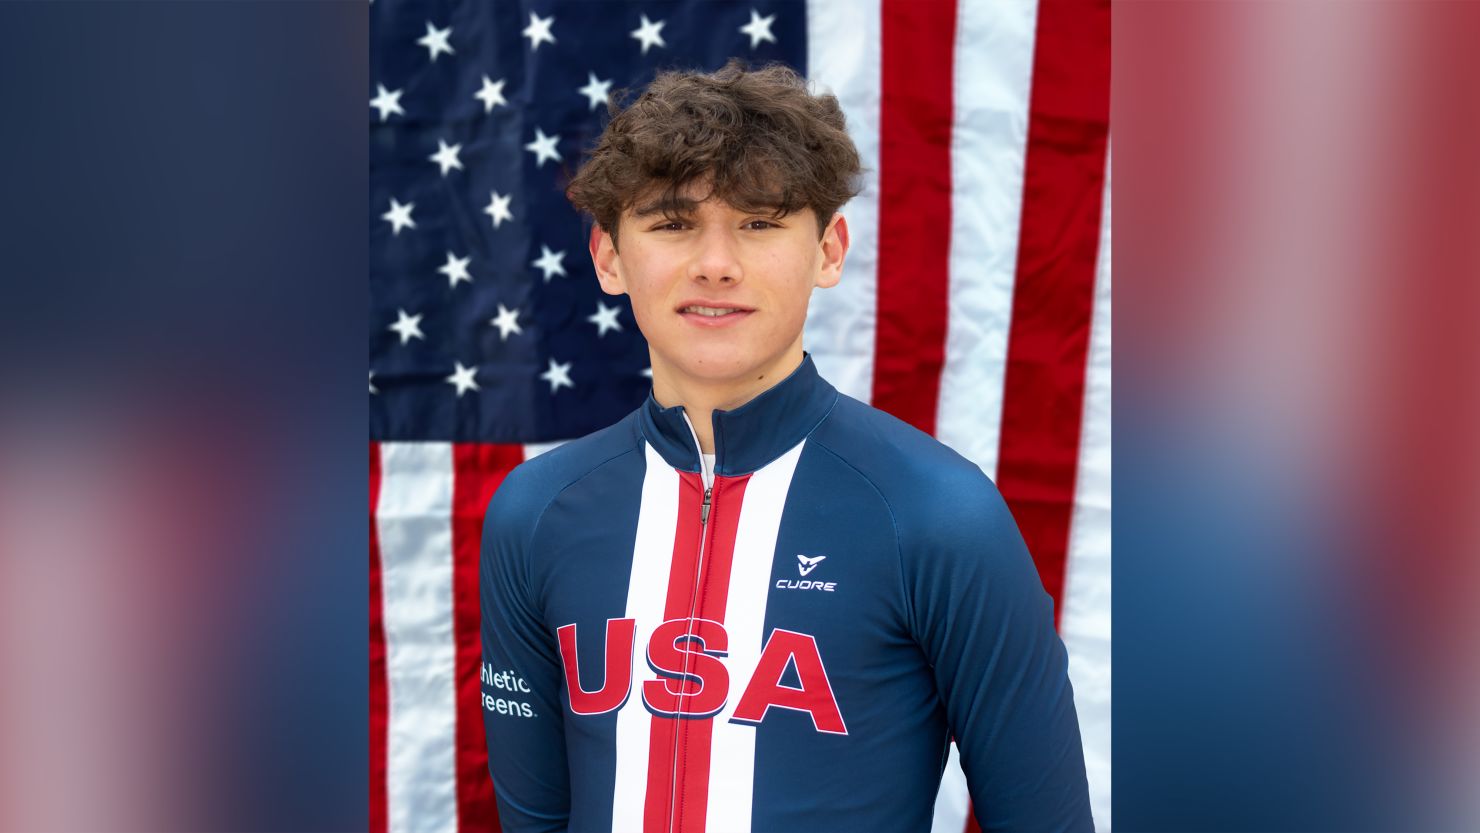 From USA Cycling press release: On Sunday, July 30th, we received the news that National Team athlete Magnus White was struck by a car on a bike ride in his home of Boulder, Colorado.